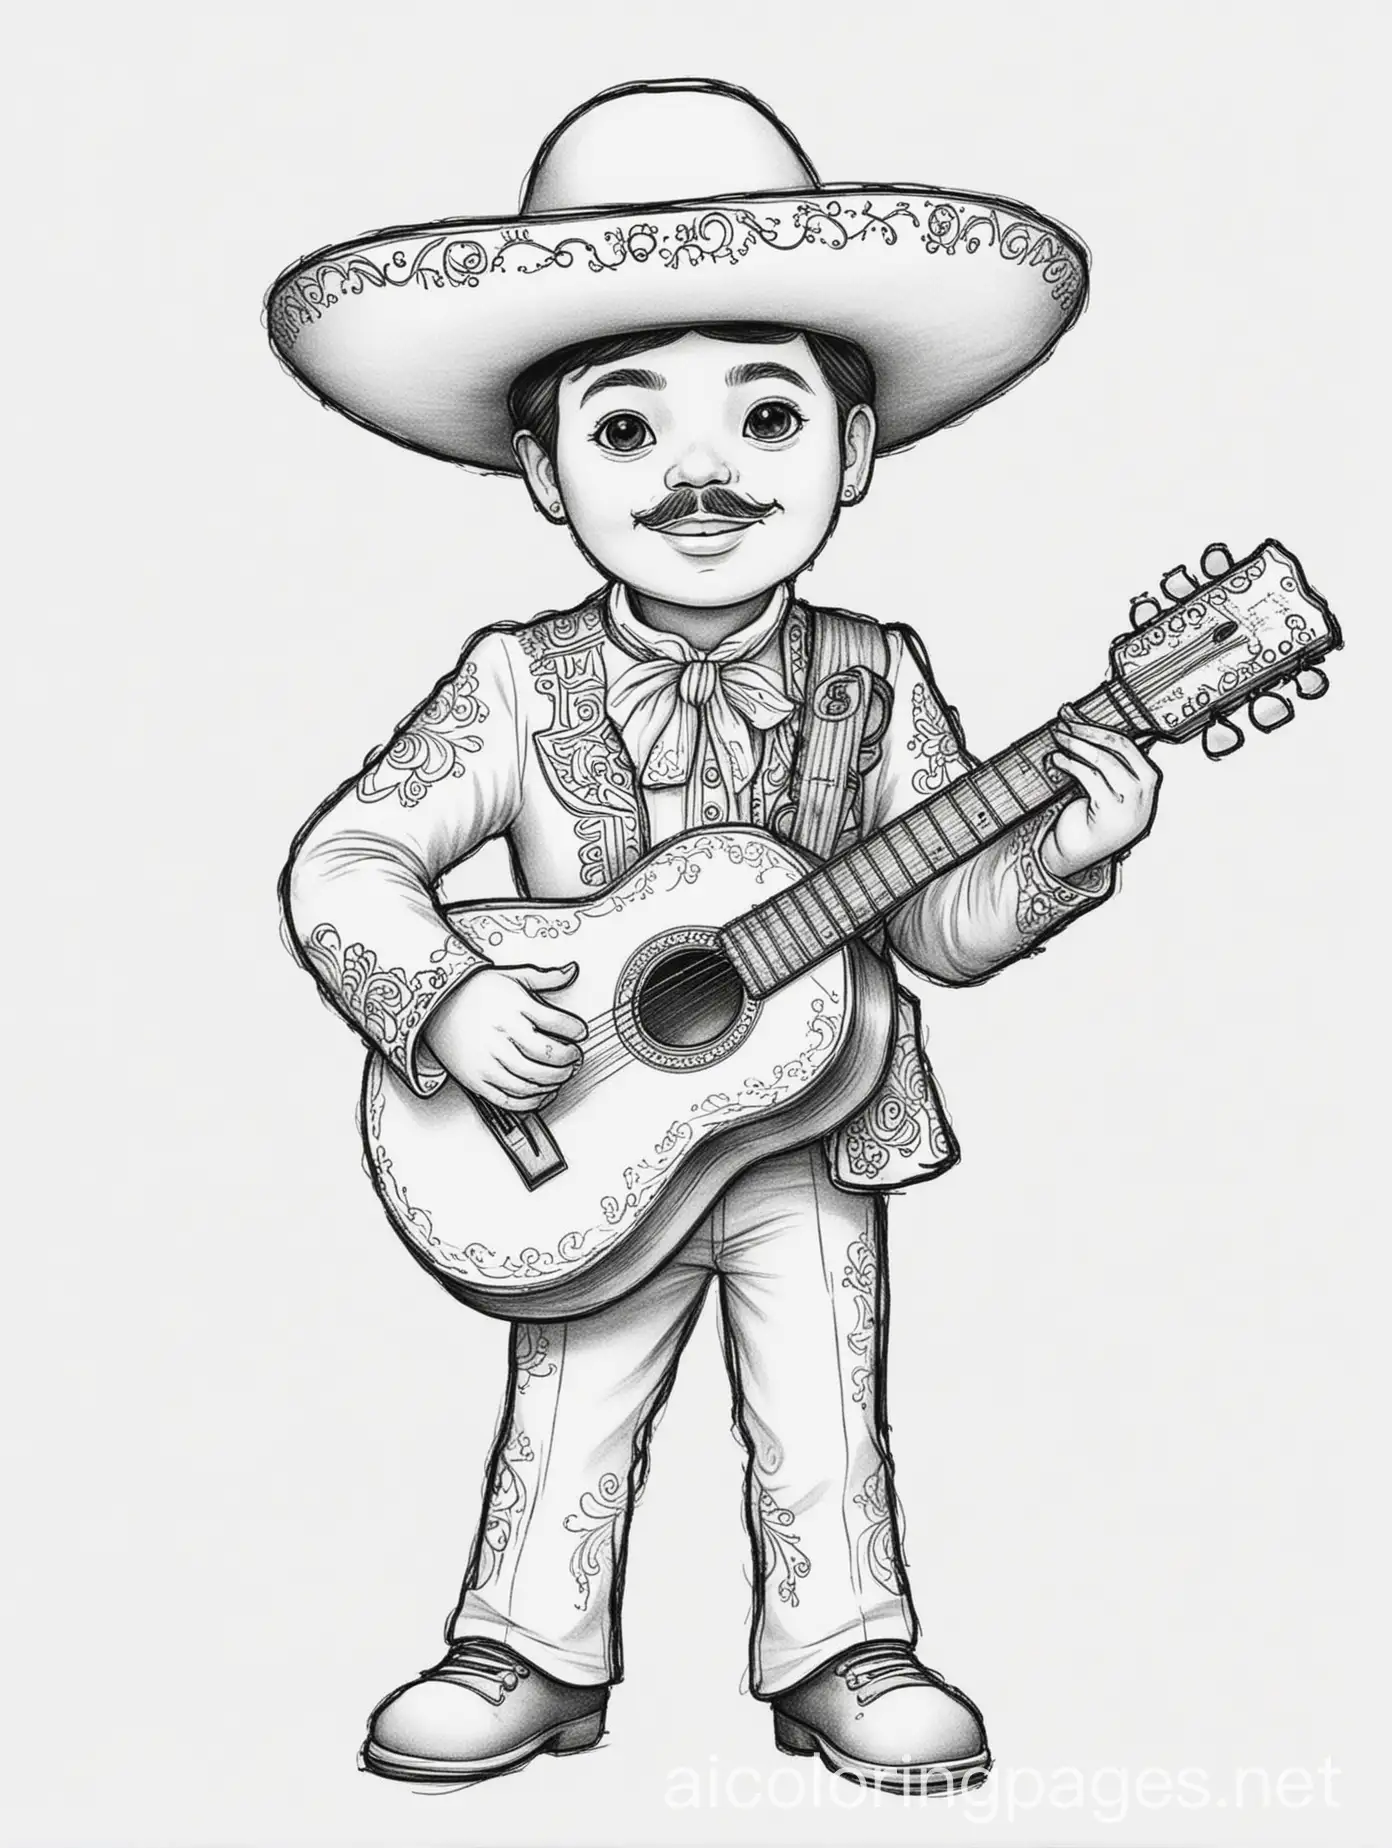 mariachi mono, Coloring Page, black and white, line art, white background, Simplicity, Ample White Space. The background of the coloring page is plain white to make it easy for young children to color within the lines. The outlines of all the subjects are easy to distinguish, making it simple for kids to color without too much difficulty